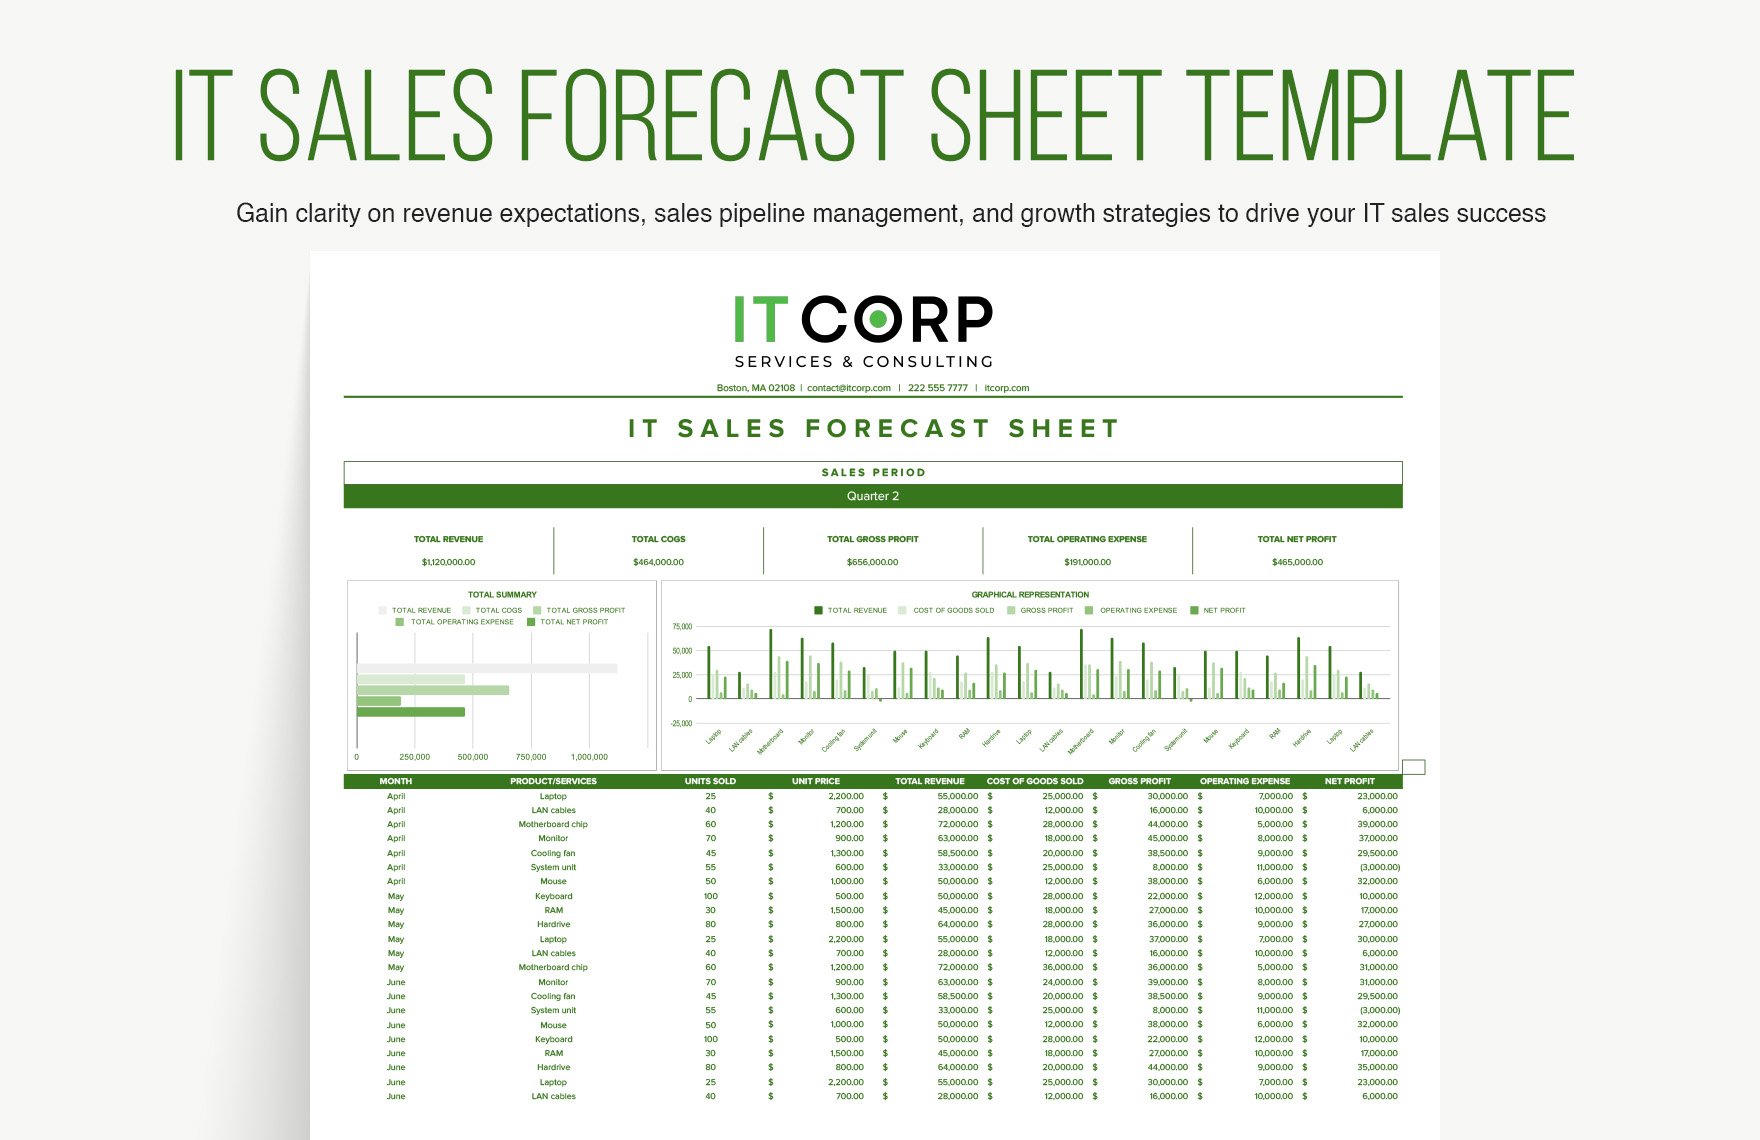 IT Sales Forecast Sheet Template